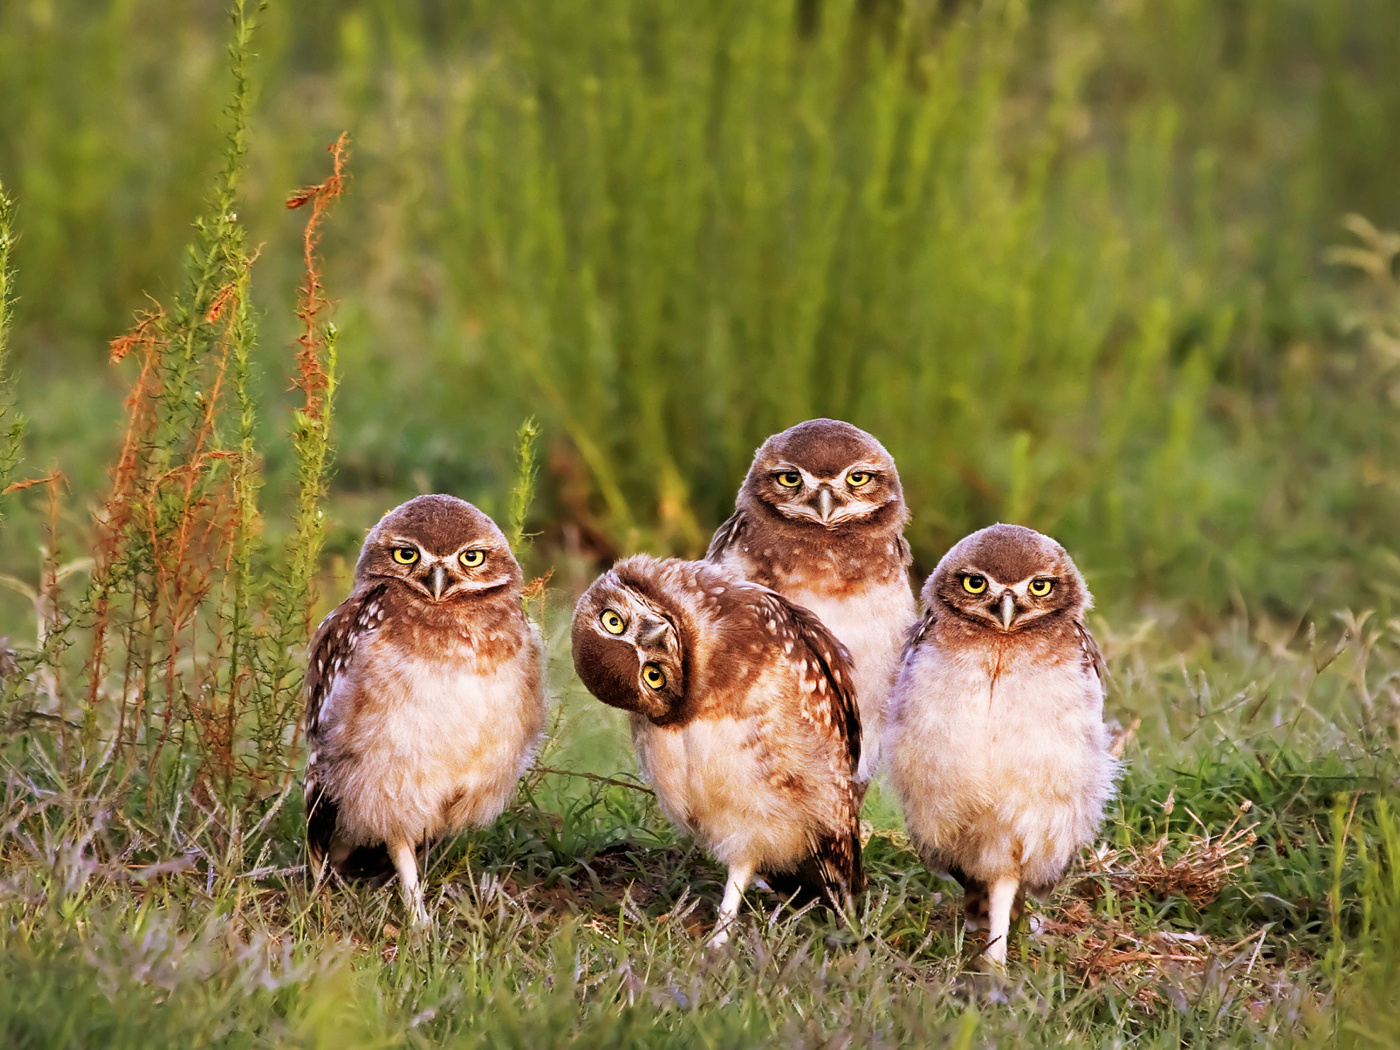 Das Morning with owls Wallpaper 1400x1050